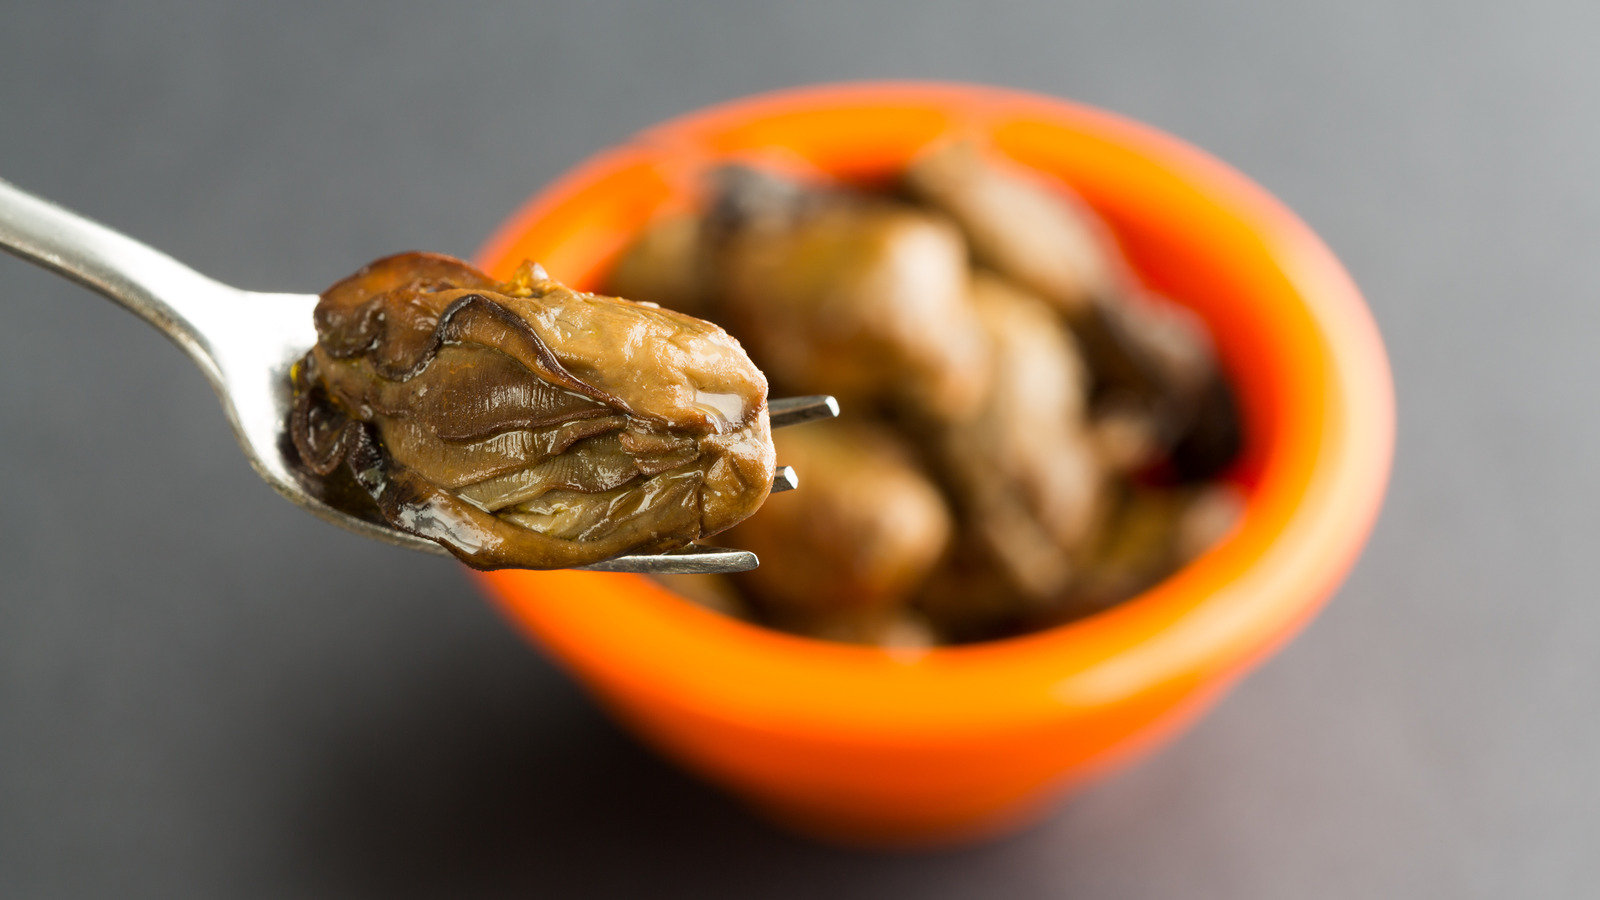 https://www.thedailymeal.com/img/gallery/can-you-use-canned-oysters-for-stew/l-intro-1701961670.jpg